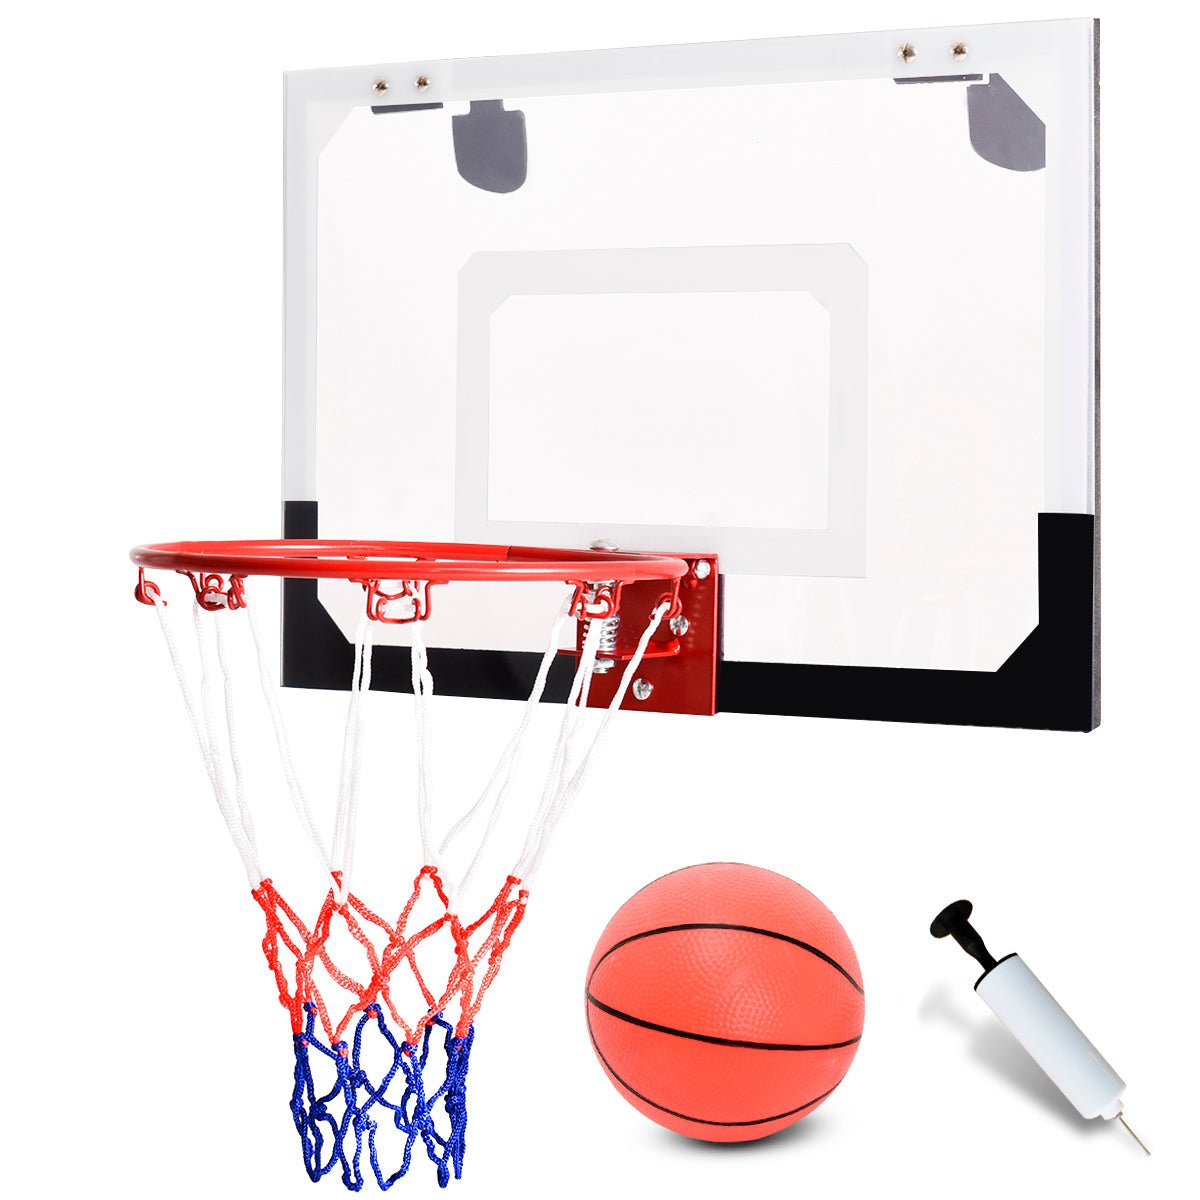 Bring the Court Inside with Mini Basketball Hoop Set and Shatterproof Backboard